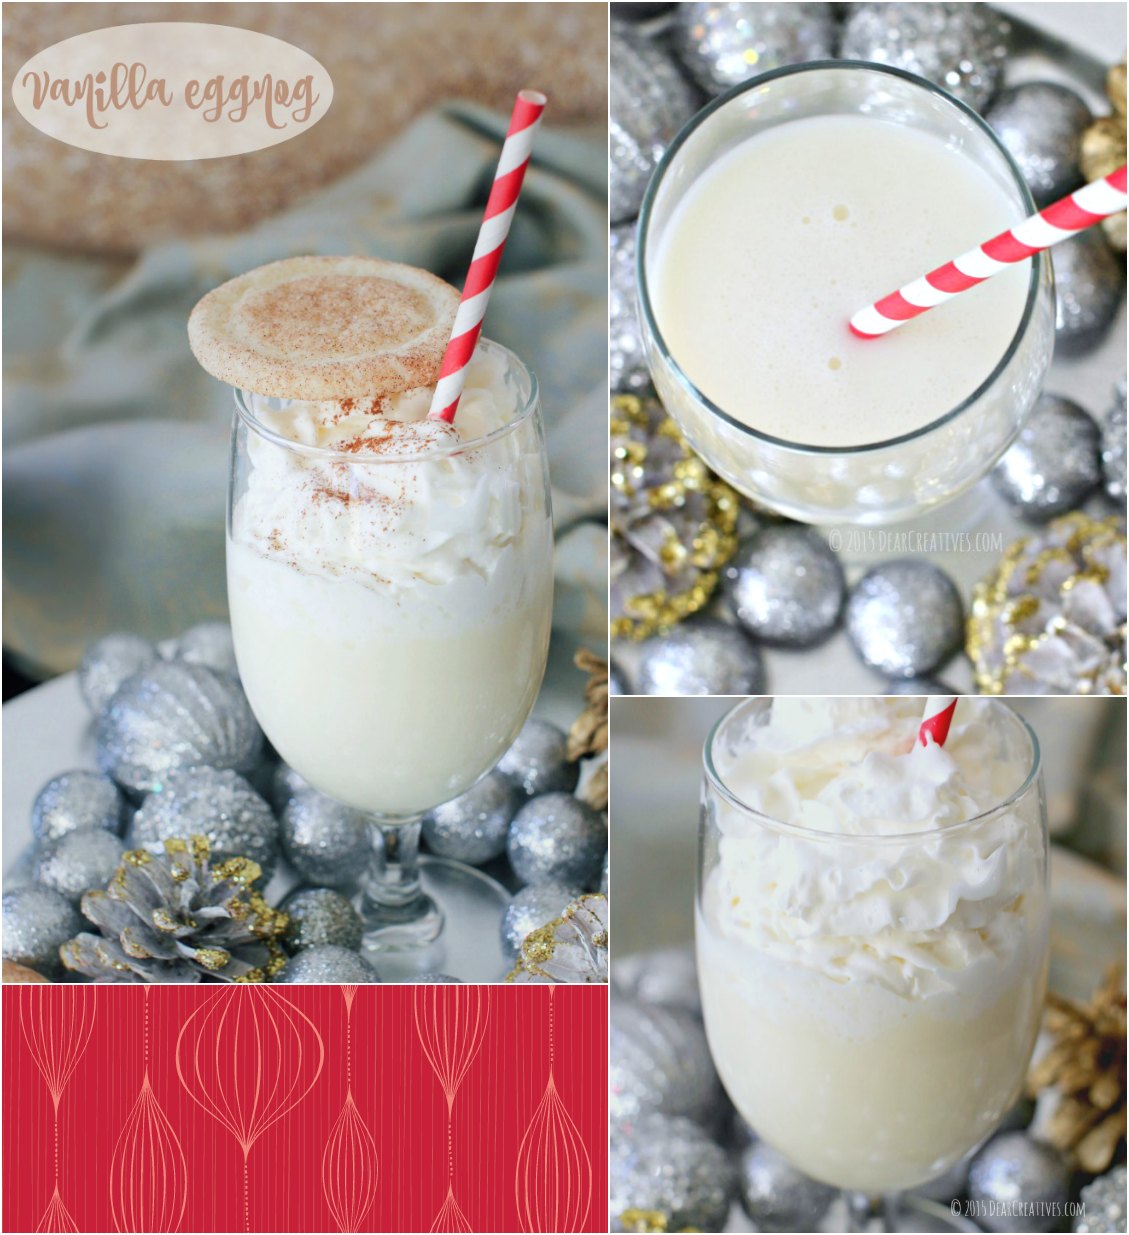 Easy Ways To Make Your Holiday Drinks Festive!